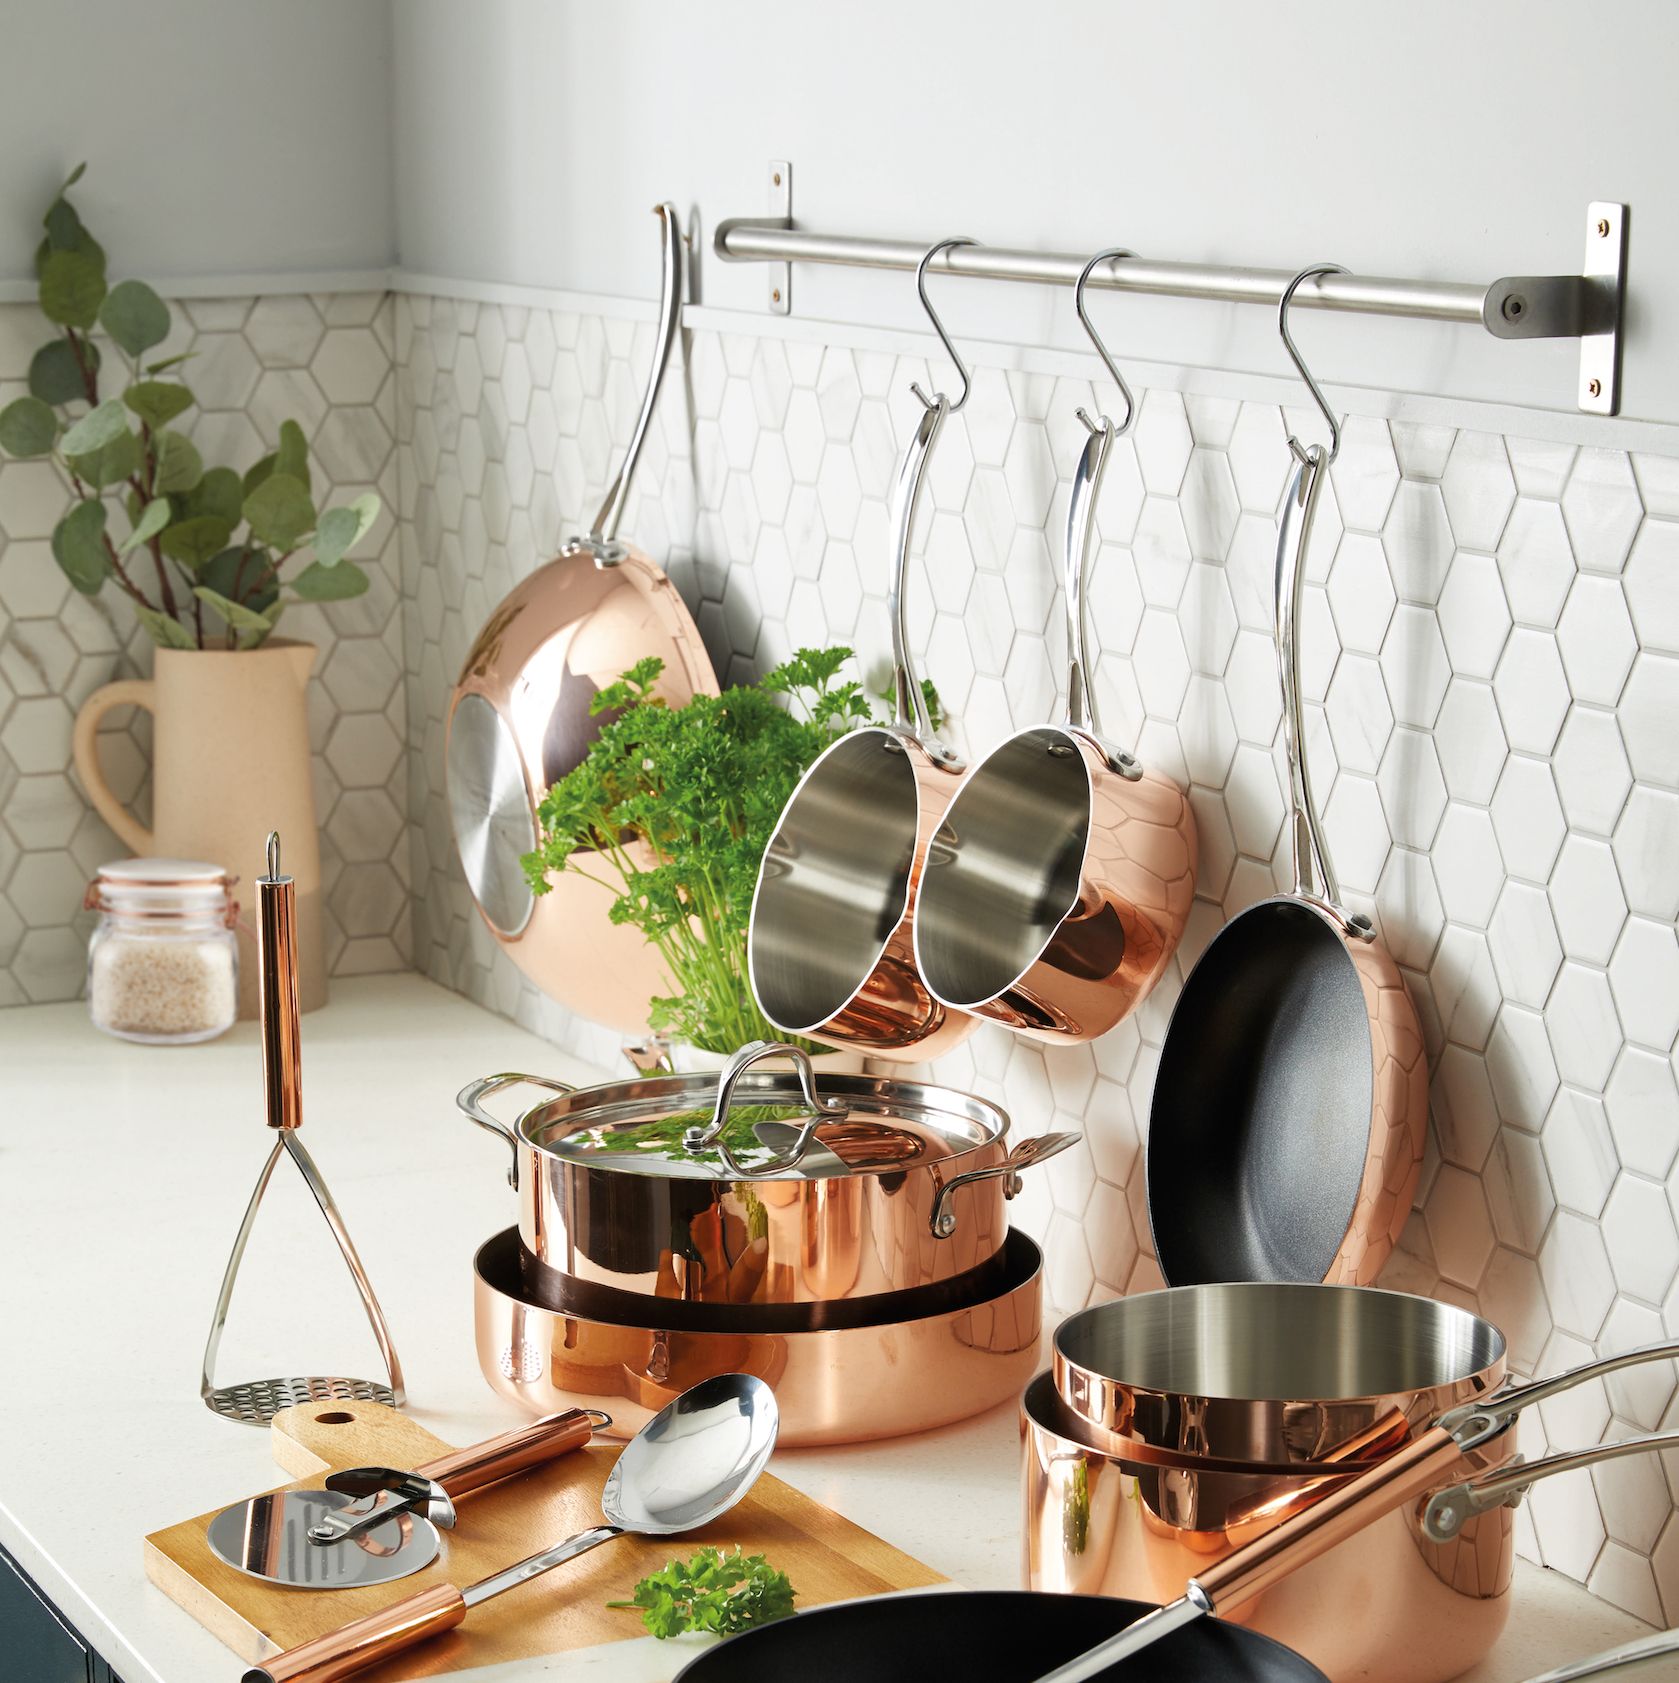 https://hips.hearstapps.com/hmg-prod/images/aldi-copper-kitchen-range-weekly-special-buys-wu4720copperkitchen-01-v2-pcm196079-1605782224.jpg?crop=1.00xw:0.654xh;0,0.130xh&resize=2048:*